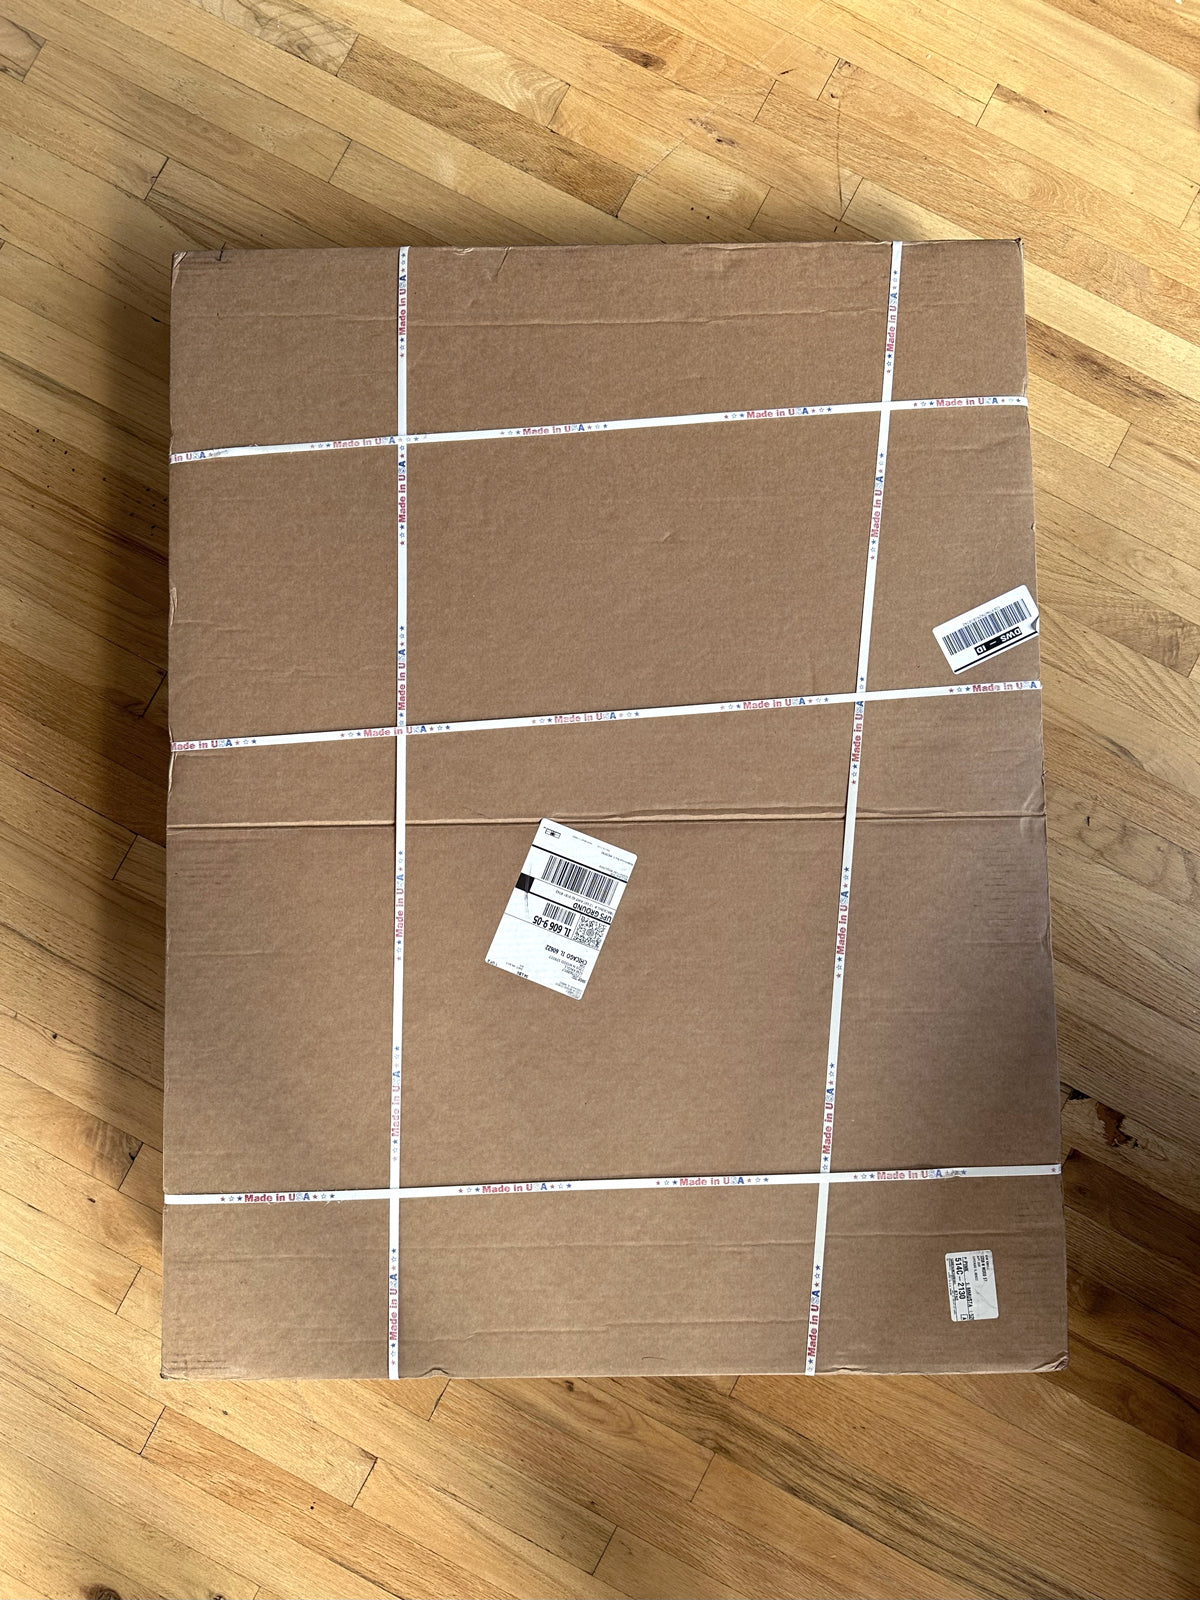 A cardboard box with plastic strapping on the outside